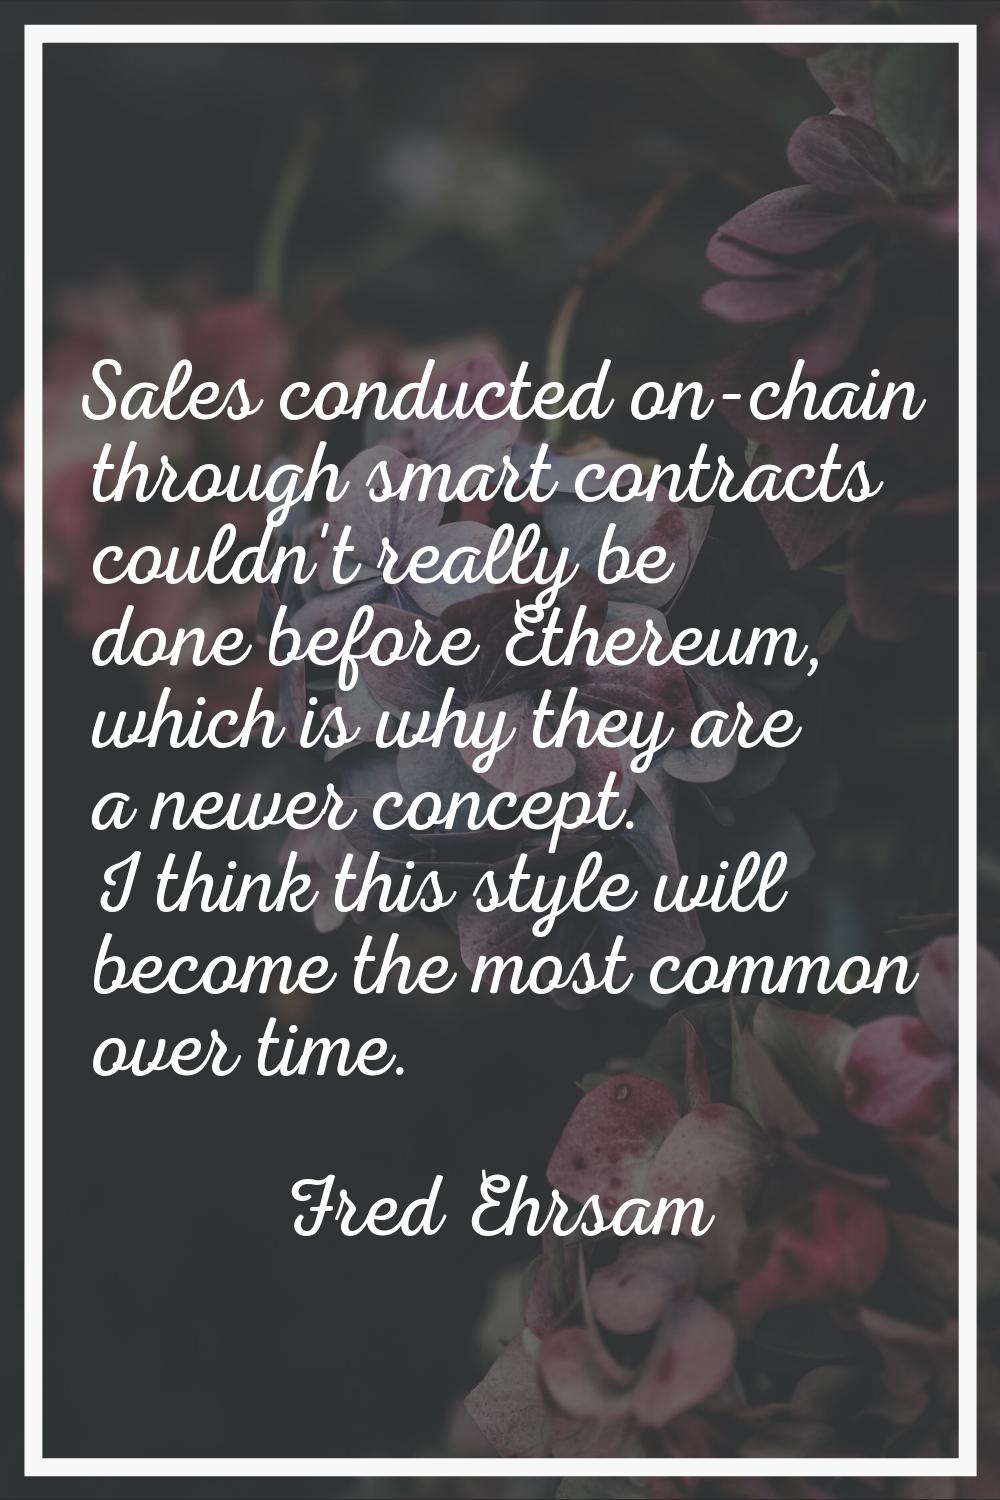 Sales conducted on-chain through smart contracts couldn't really be done before Ethereum, which is 